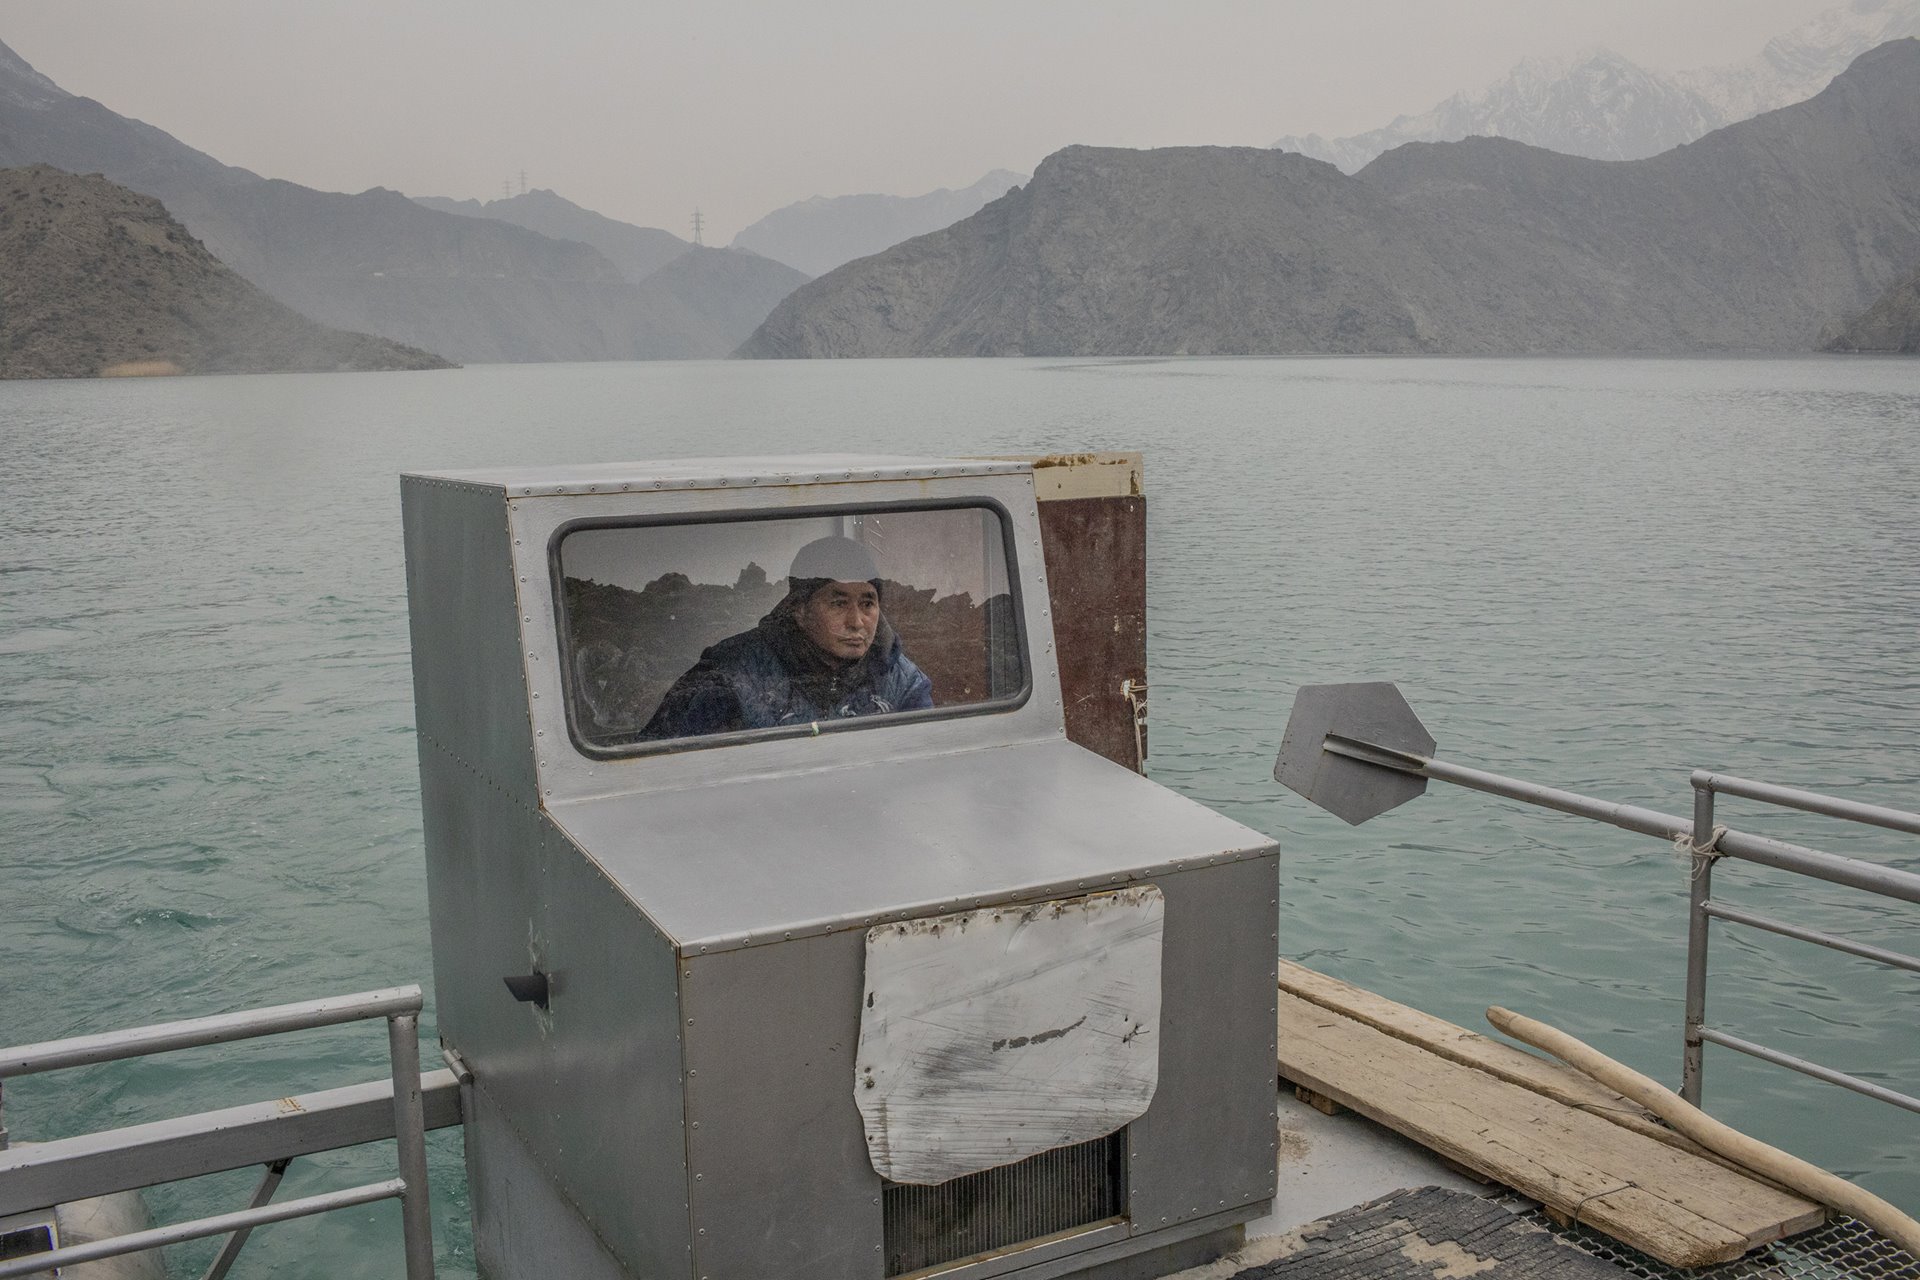 <p>Sonunbek Kadyrov pilots his water taxi, serving the village of Kyzyl-Beyit, Kyrgyzstan. Local access to the main road was blocked by flooding during construction of the Kurpsayskaya Dam in the 1960s.</p>
